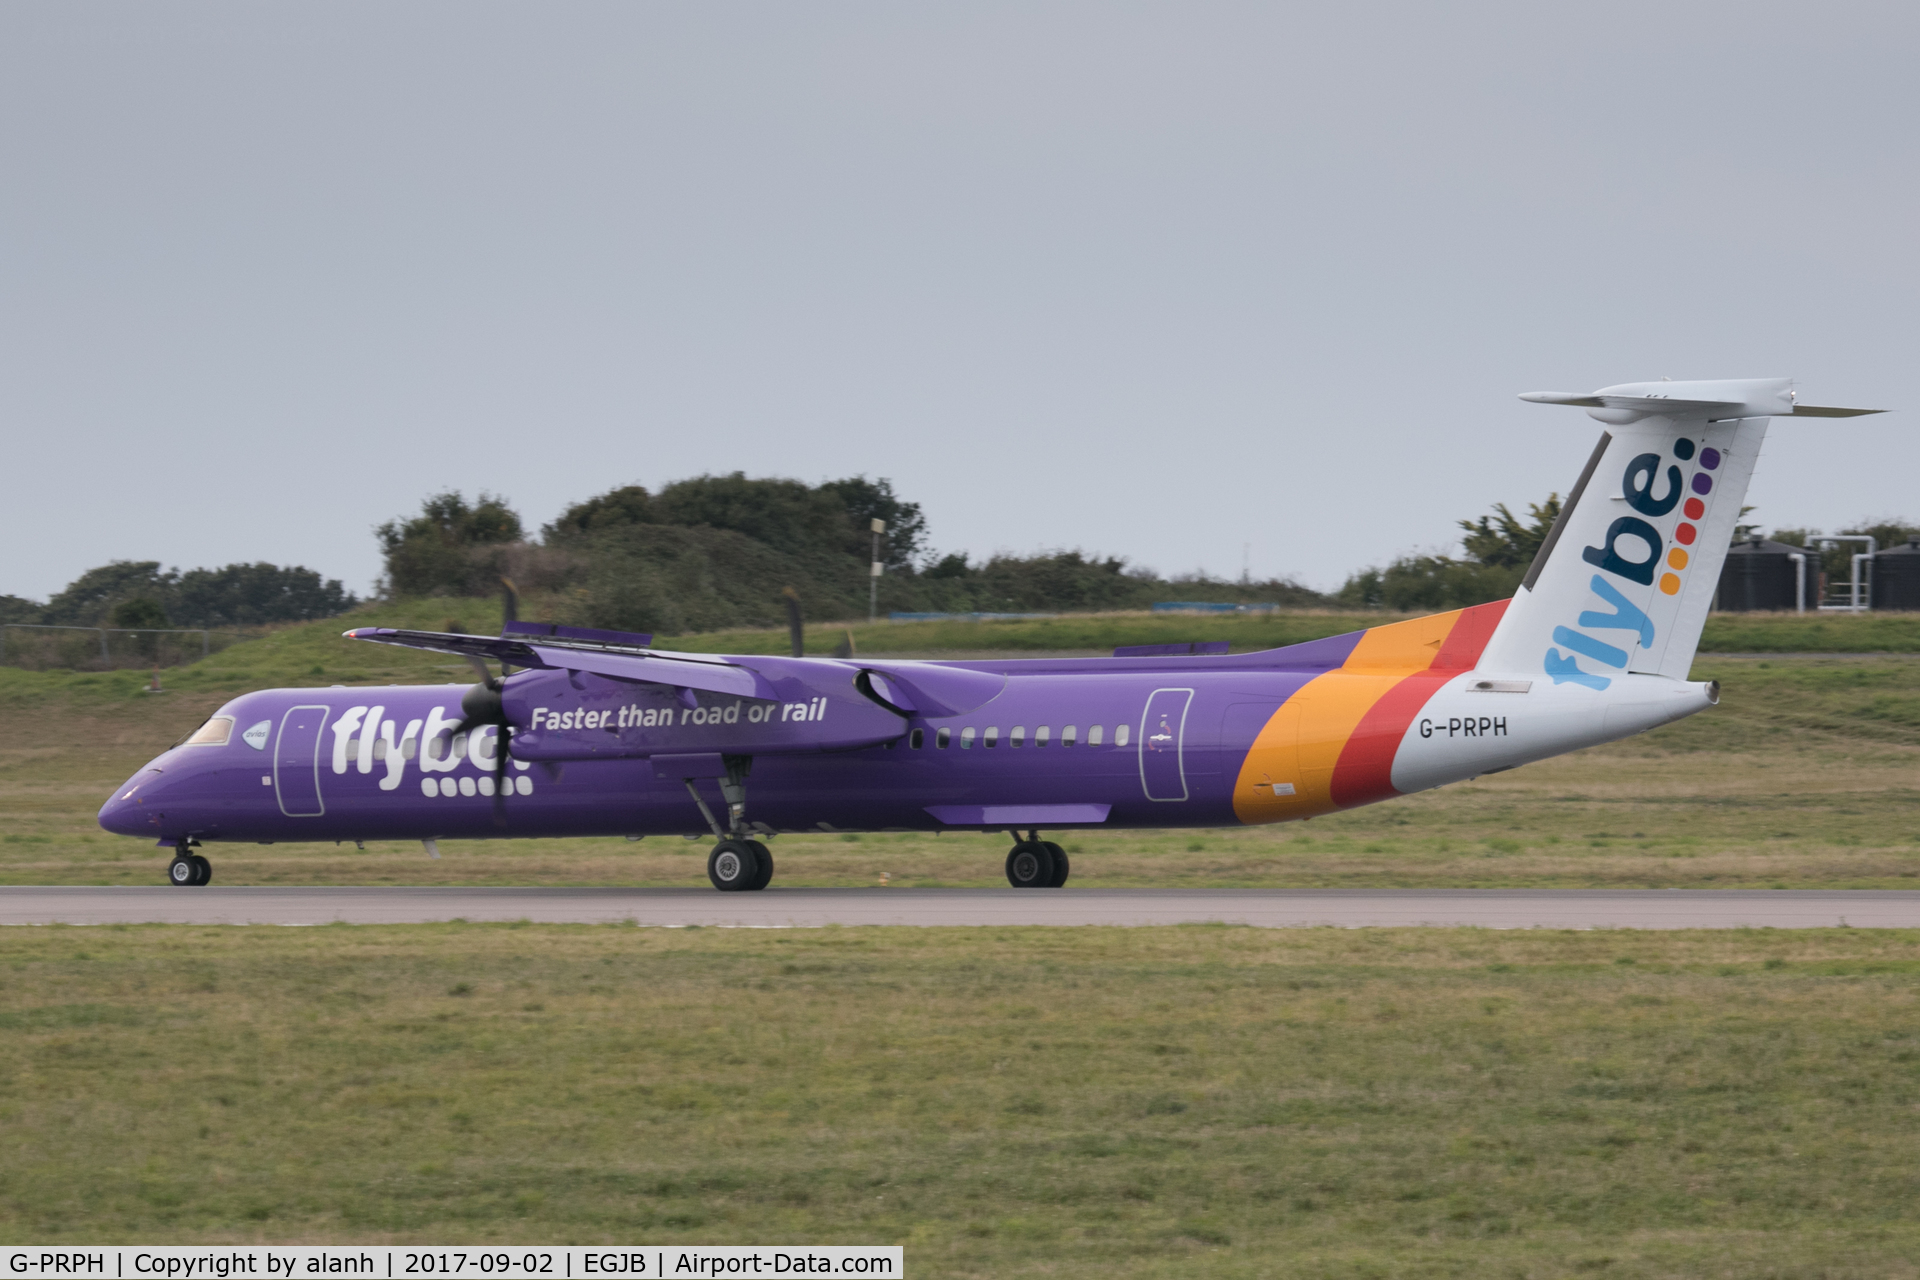 G-PRPH, 2010 Bombardier DHC-8-402 Dash 8 C/N 4323, Arriving at Guernsey from Exeter